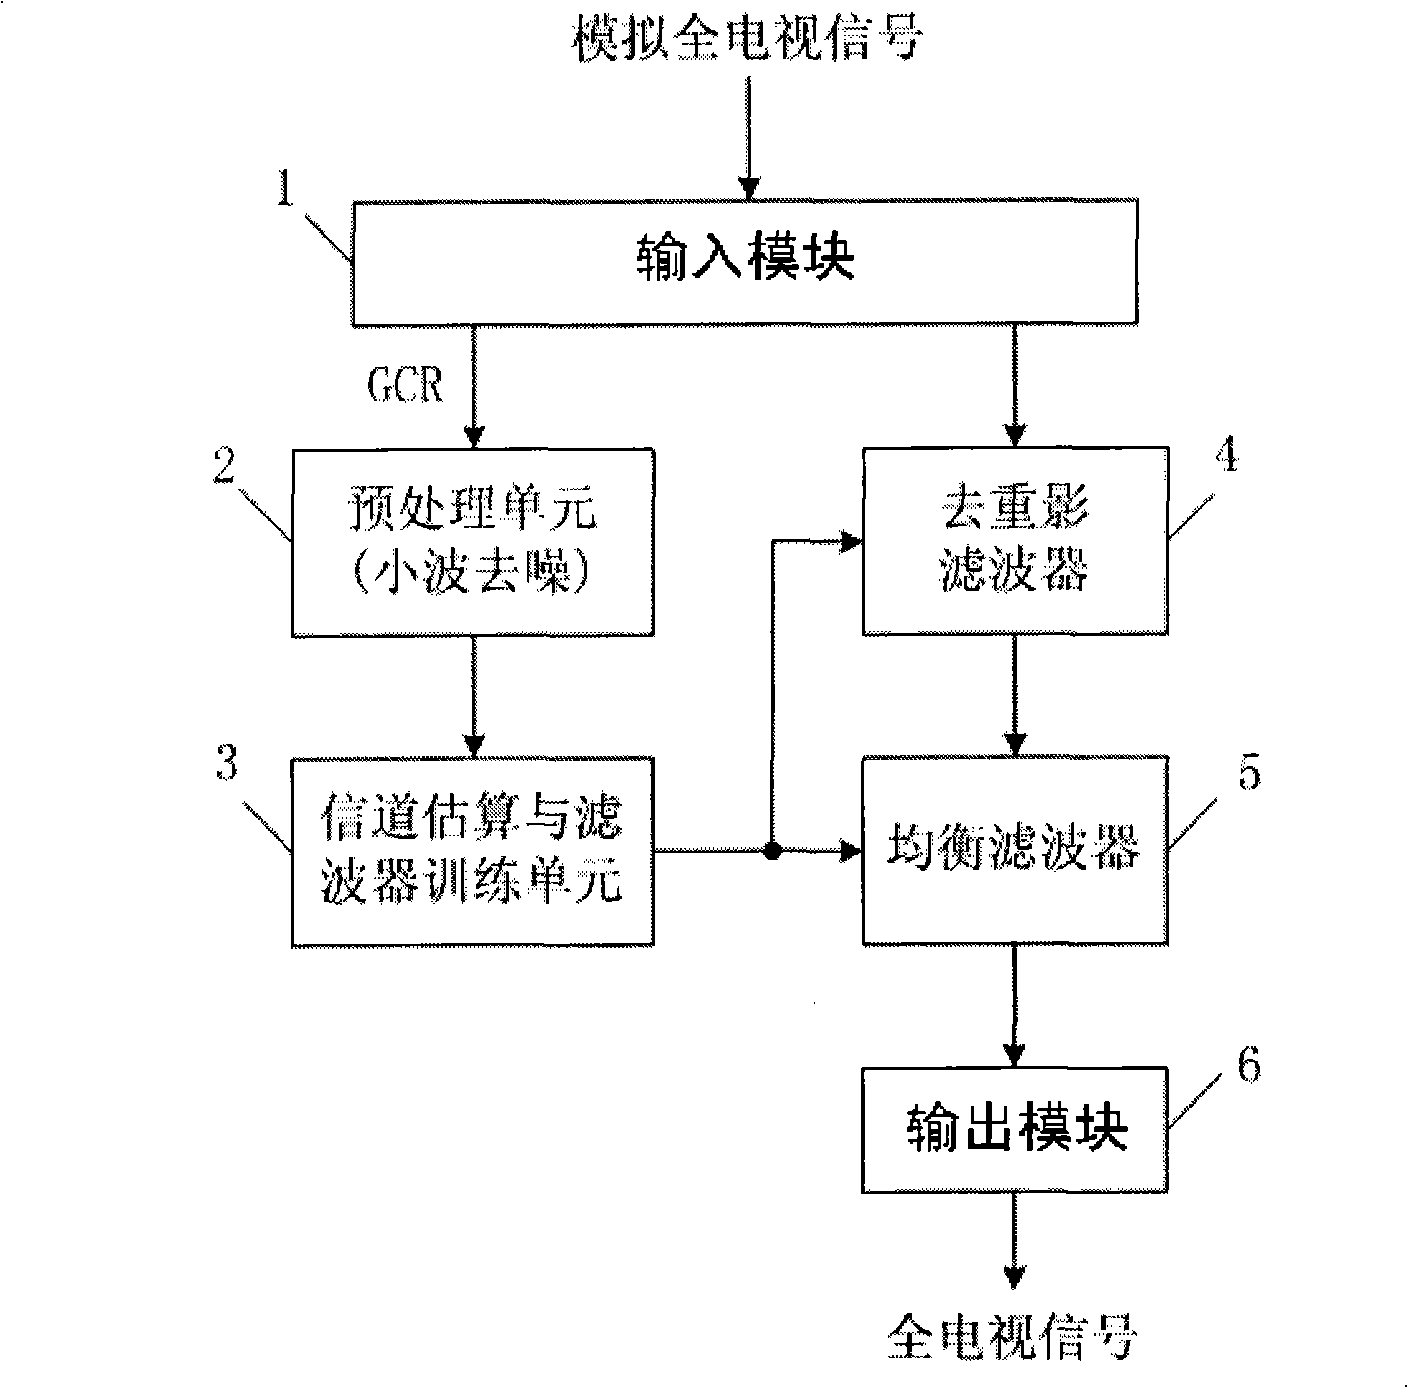 Method and system for eliminating ghost of television signal based on wavelet preprocessing GCR